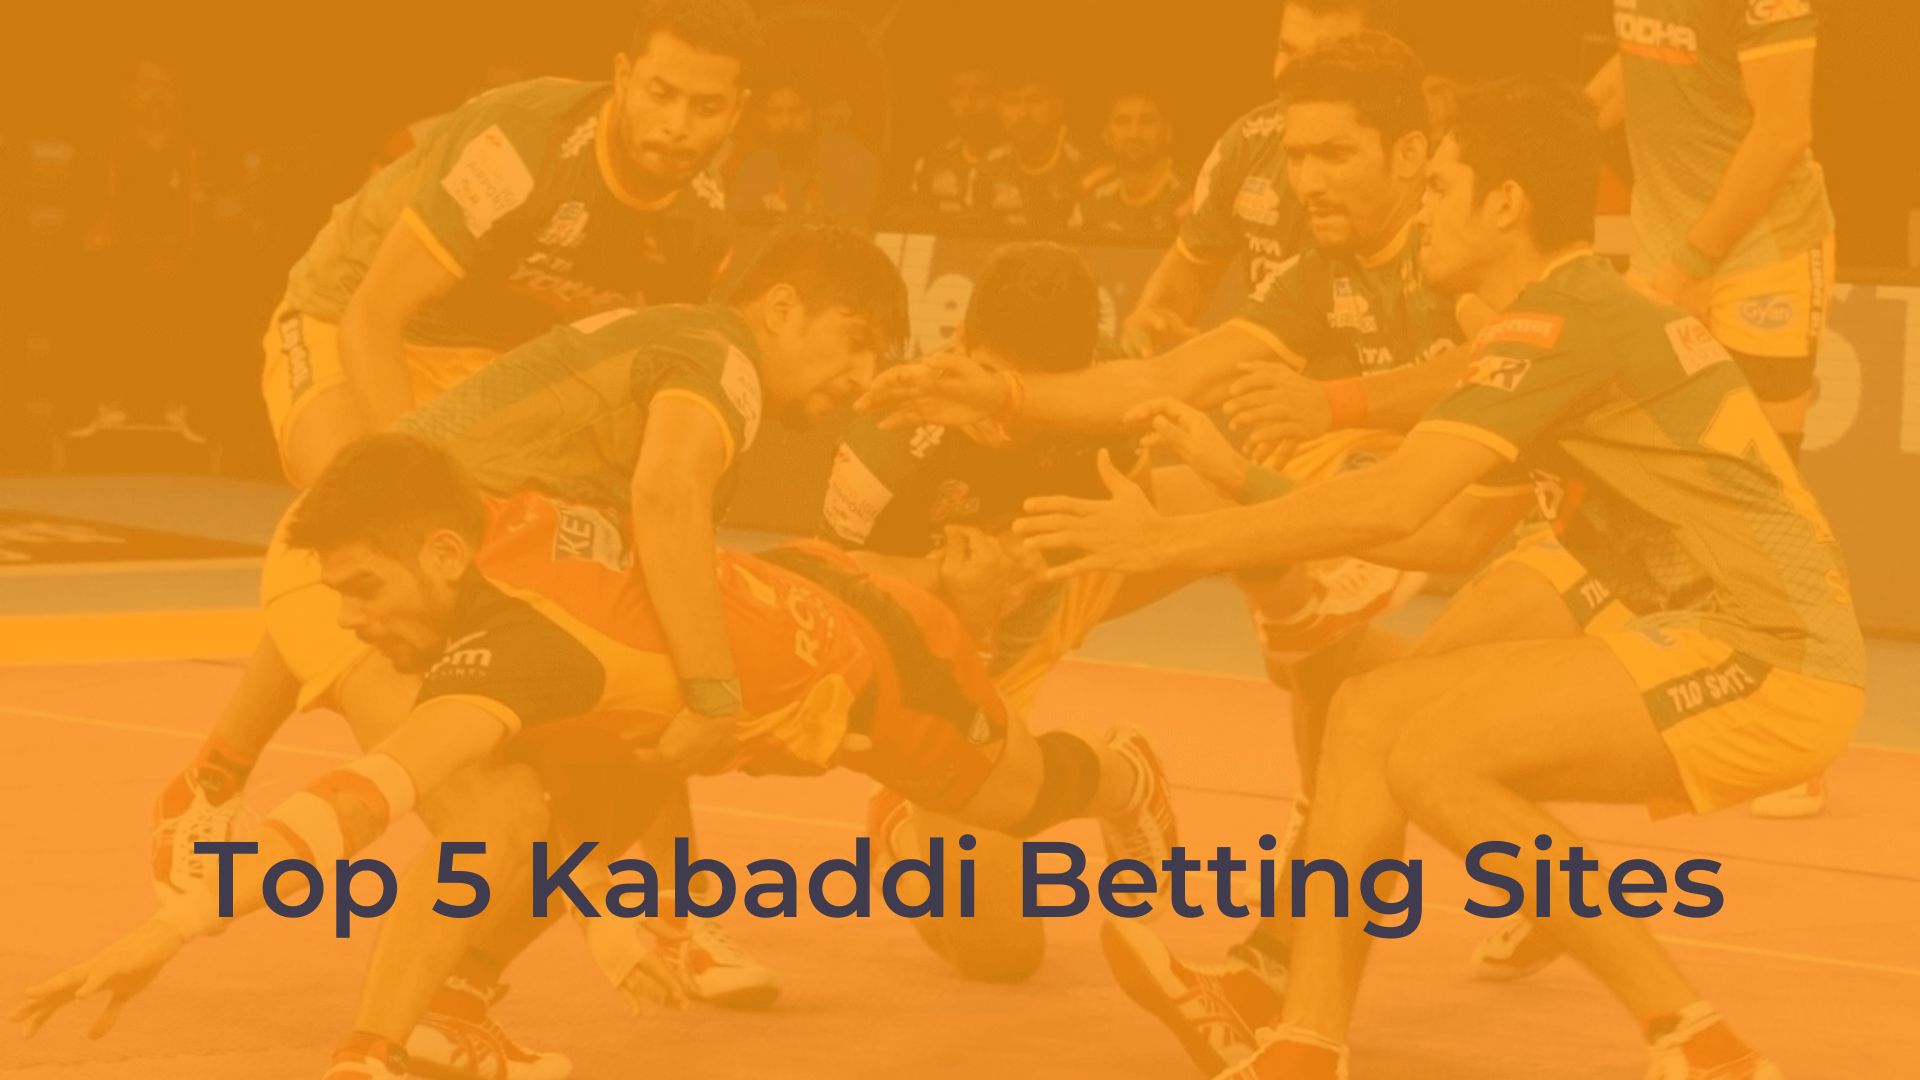 Top 5 Kabaddi Betting Sites: A Quick Look